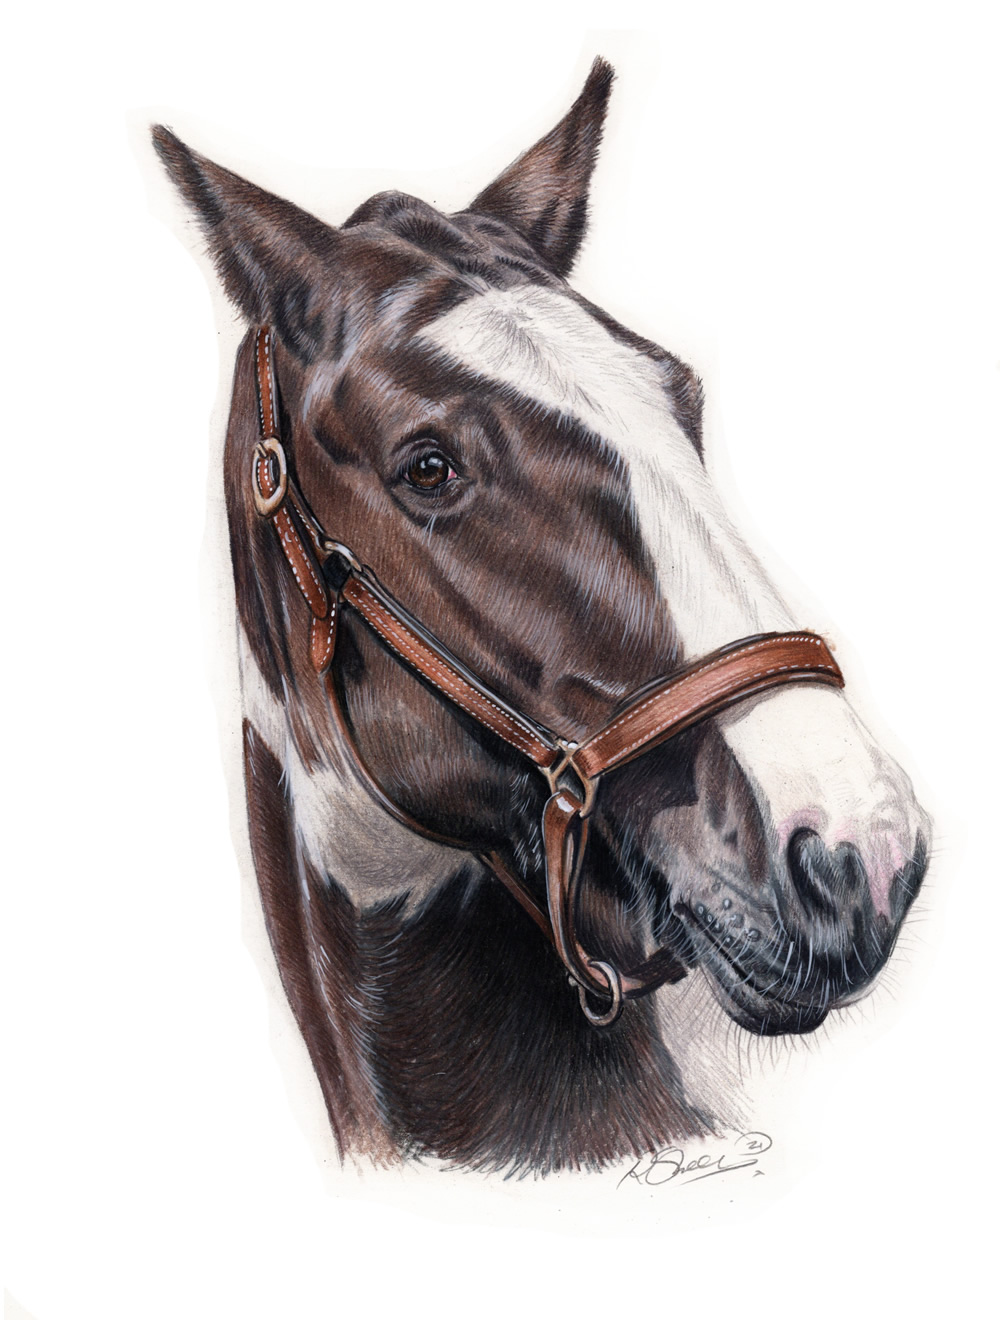 You guys liked the drawing of the golden, so here's a horse. : r/drawing